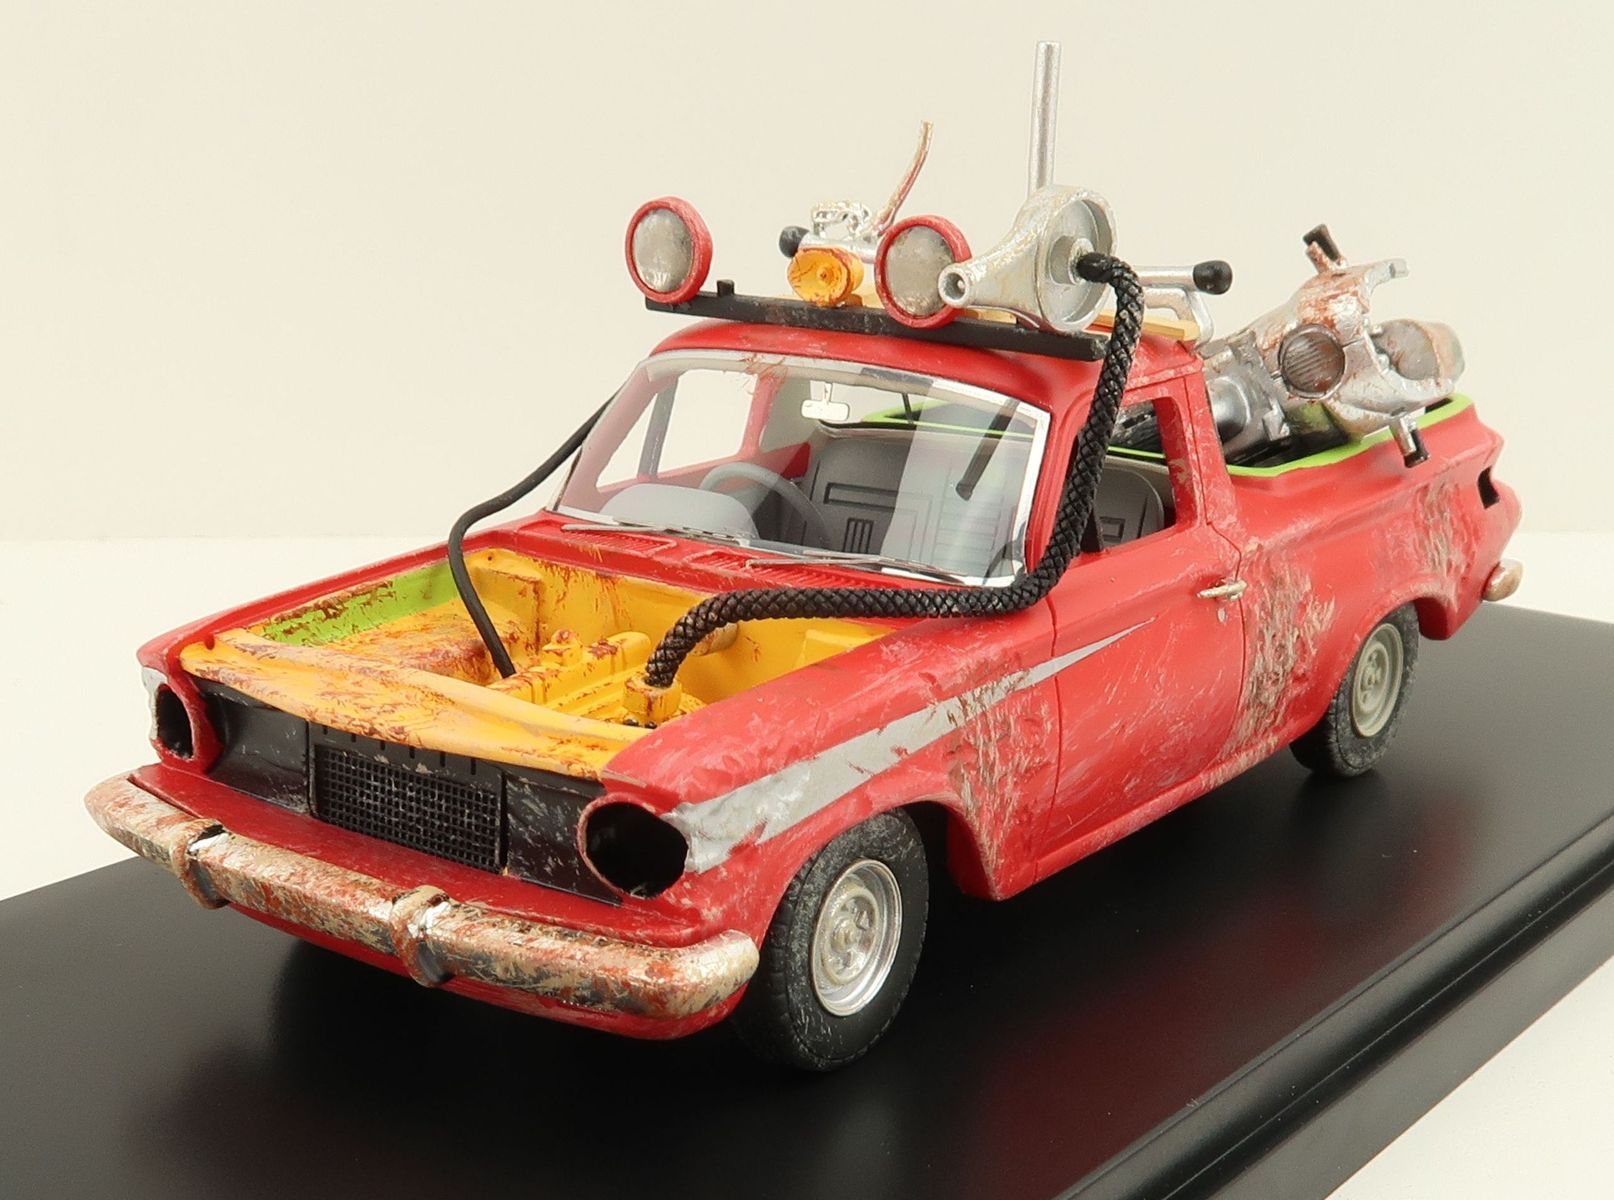 Product Image - ACE Models - Holden EJ Ute Damaged with Gooses Kawasaki Bike Mad Max Resin - Scale 1:43